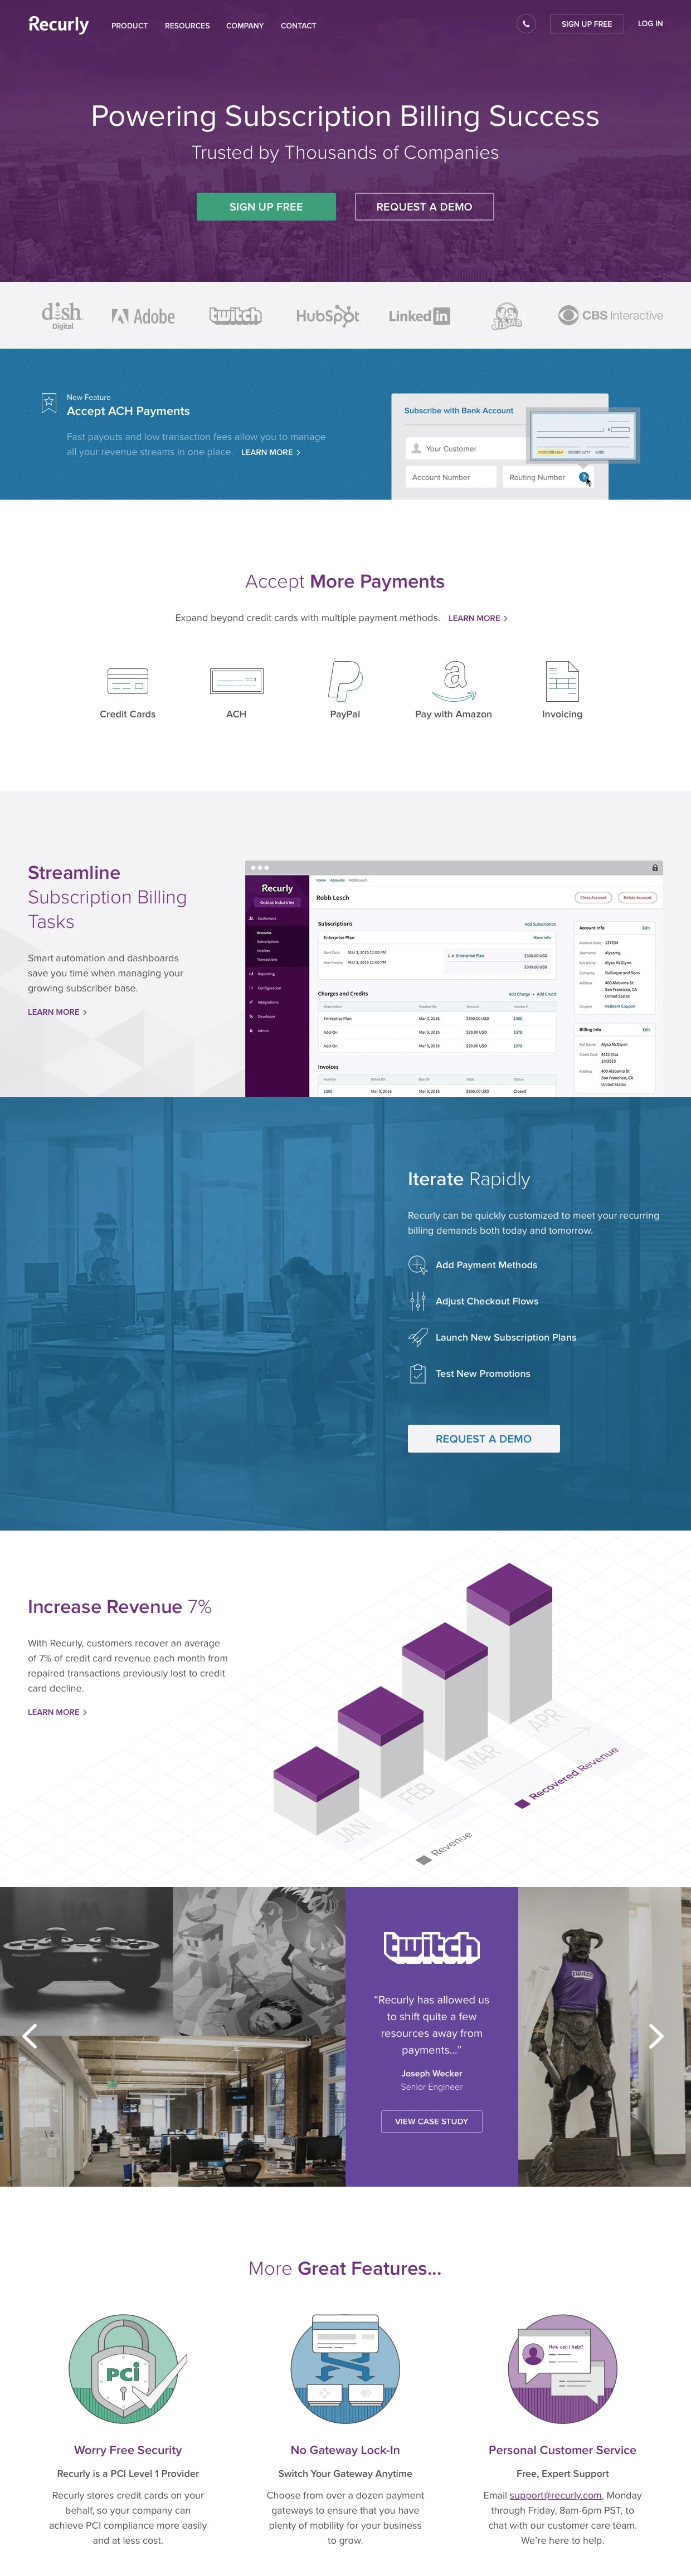 Recurly Landing Page Example: Subscription billing and recurring billing management.  Recurly offers enterprise-class subscription billing for thousands of companies worldwide.